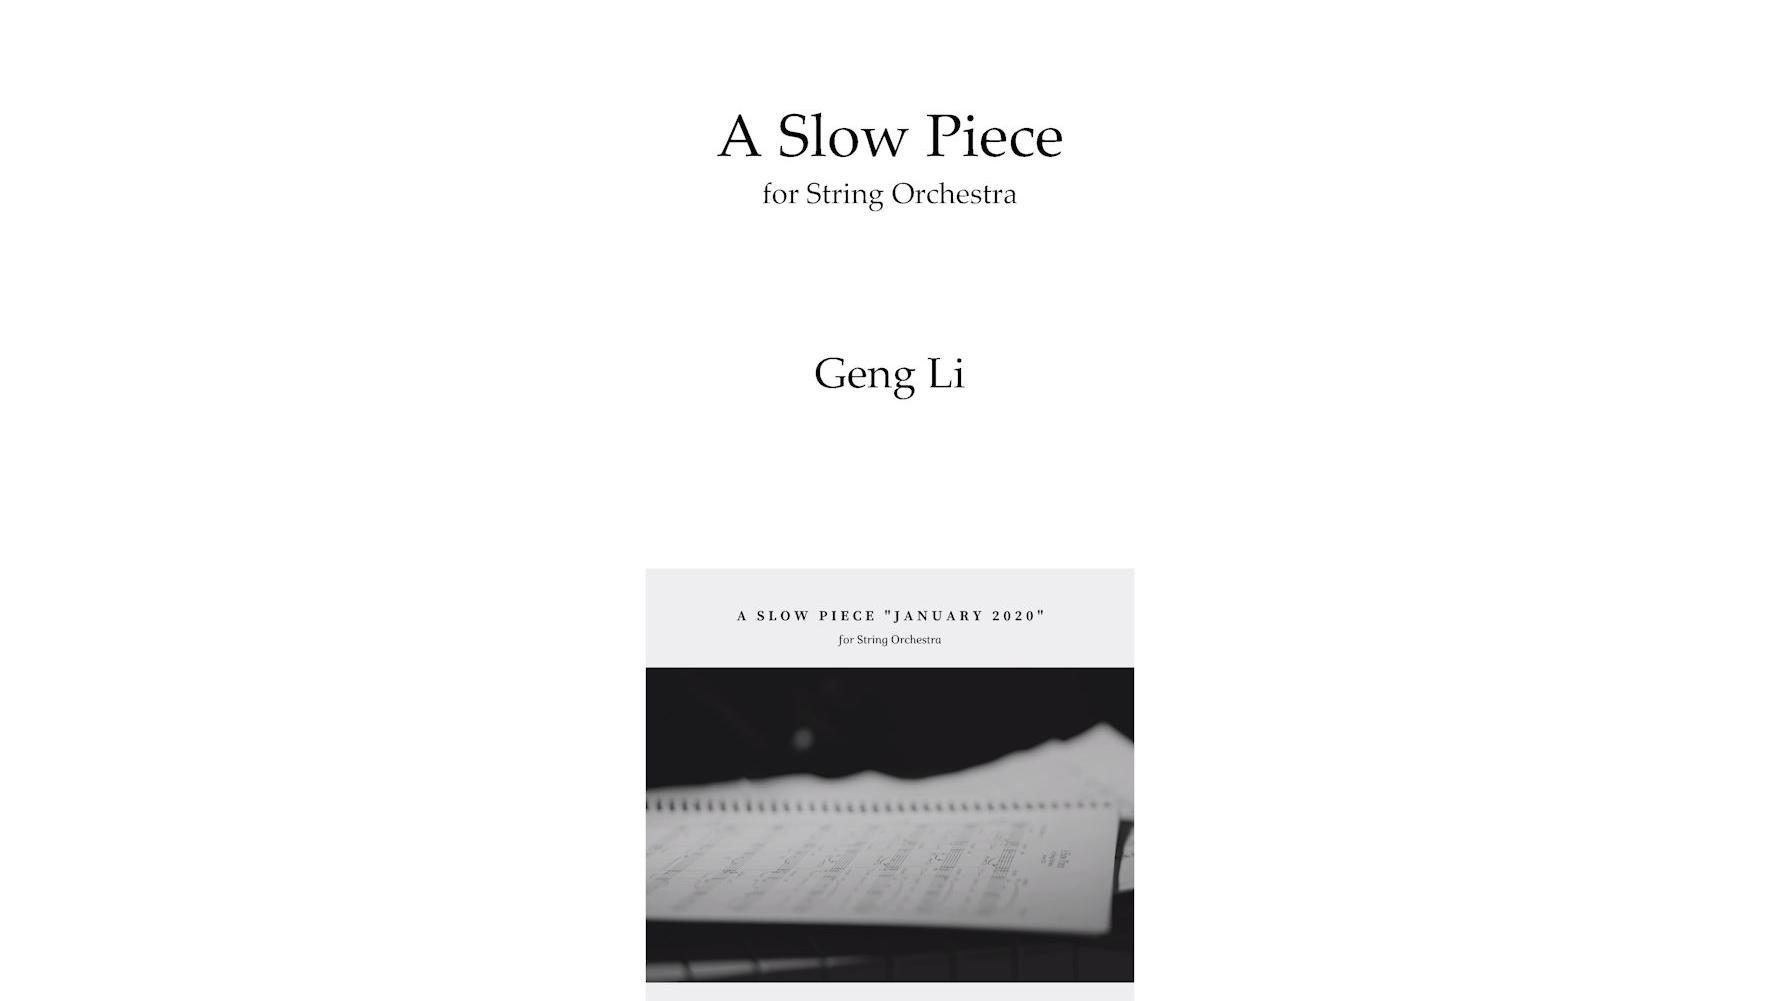 Reagan Li - A Slow Piece for String Orchestra (一月 2020)